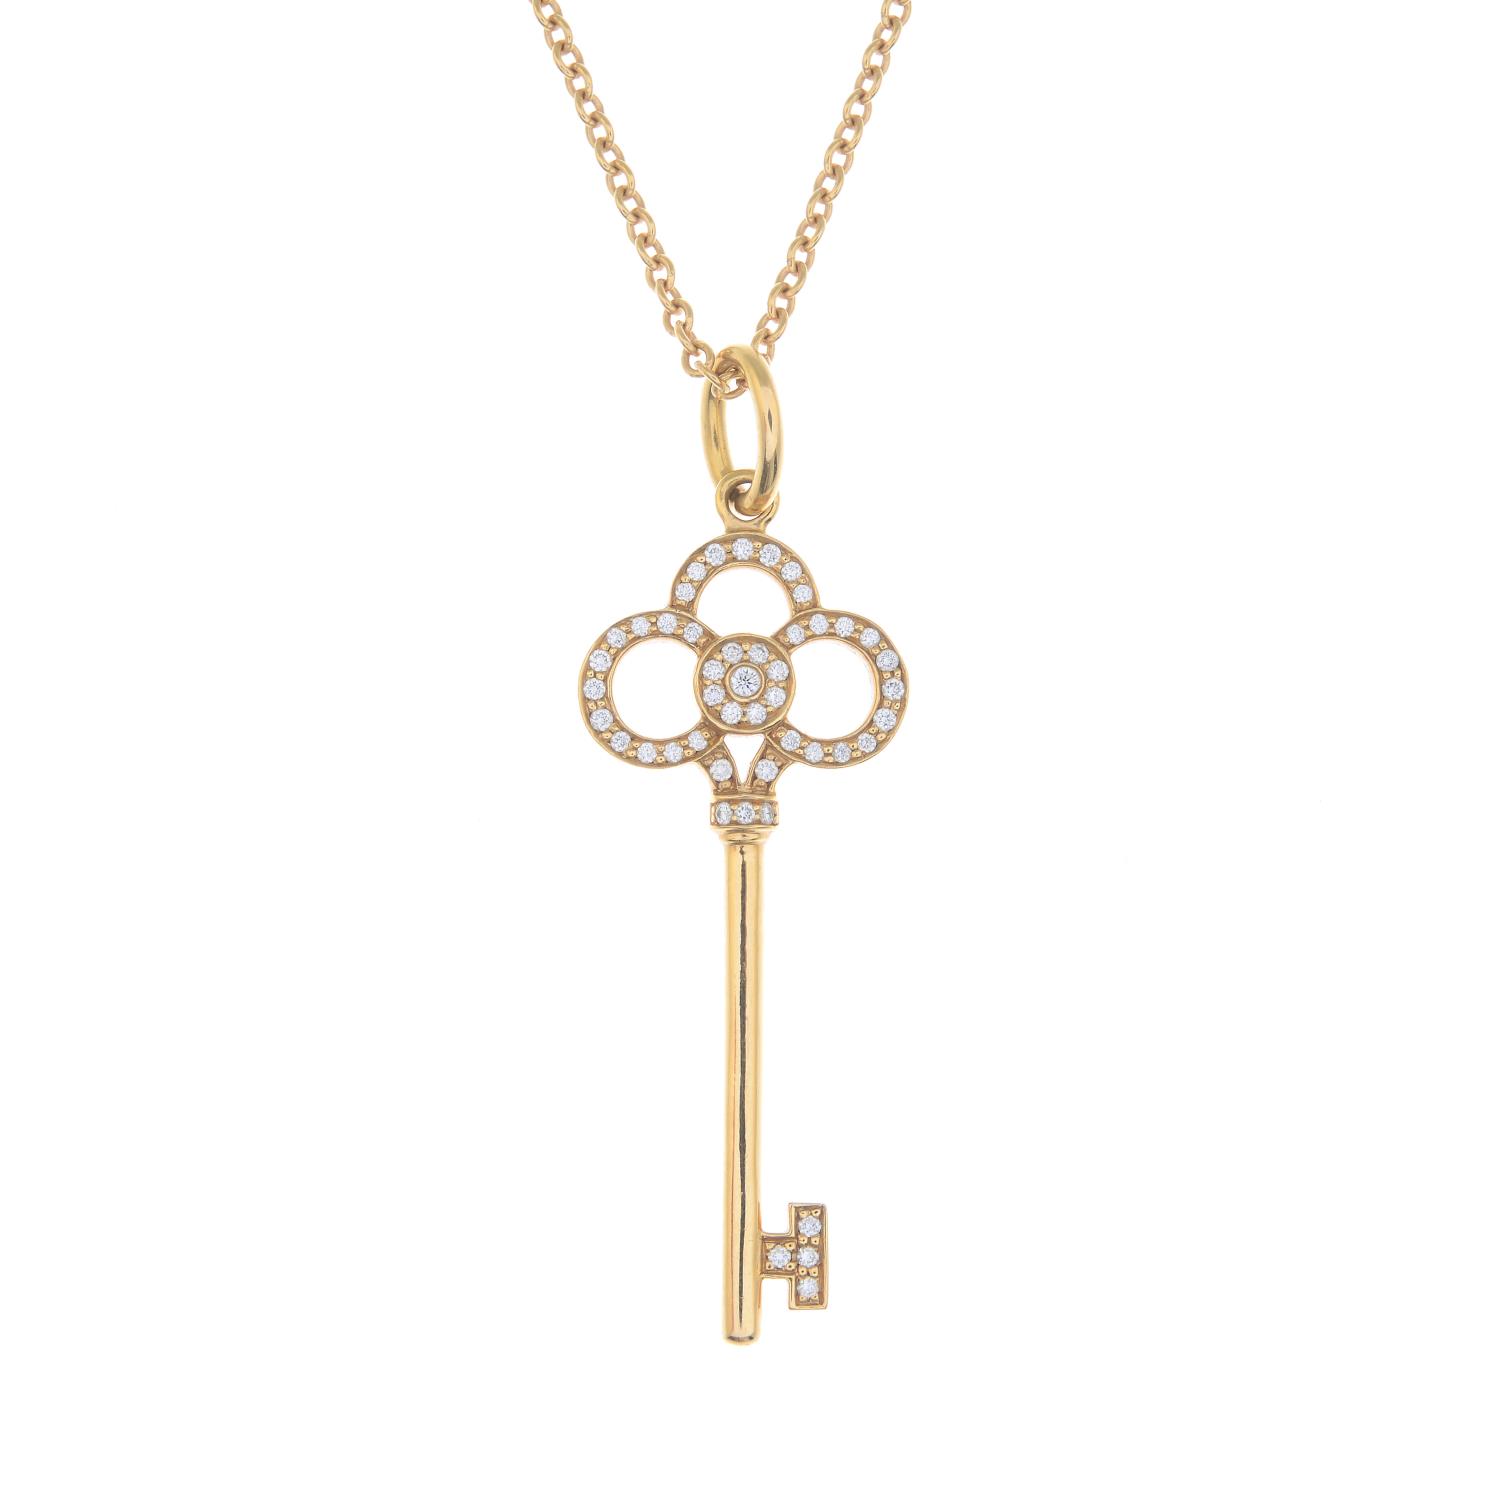 An 18ct gold diamond key pendant, with chain, by Tiffany & Co. - Image 5 of 5